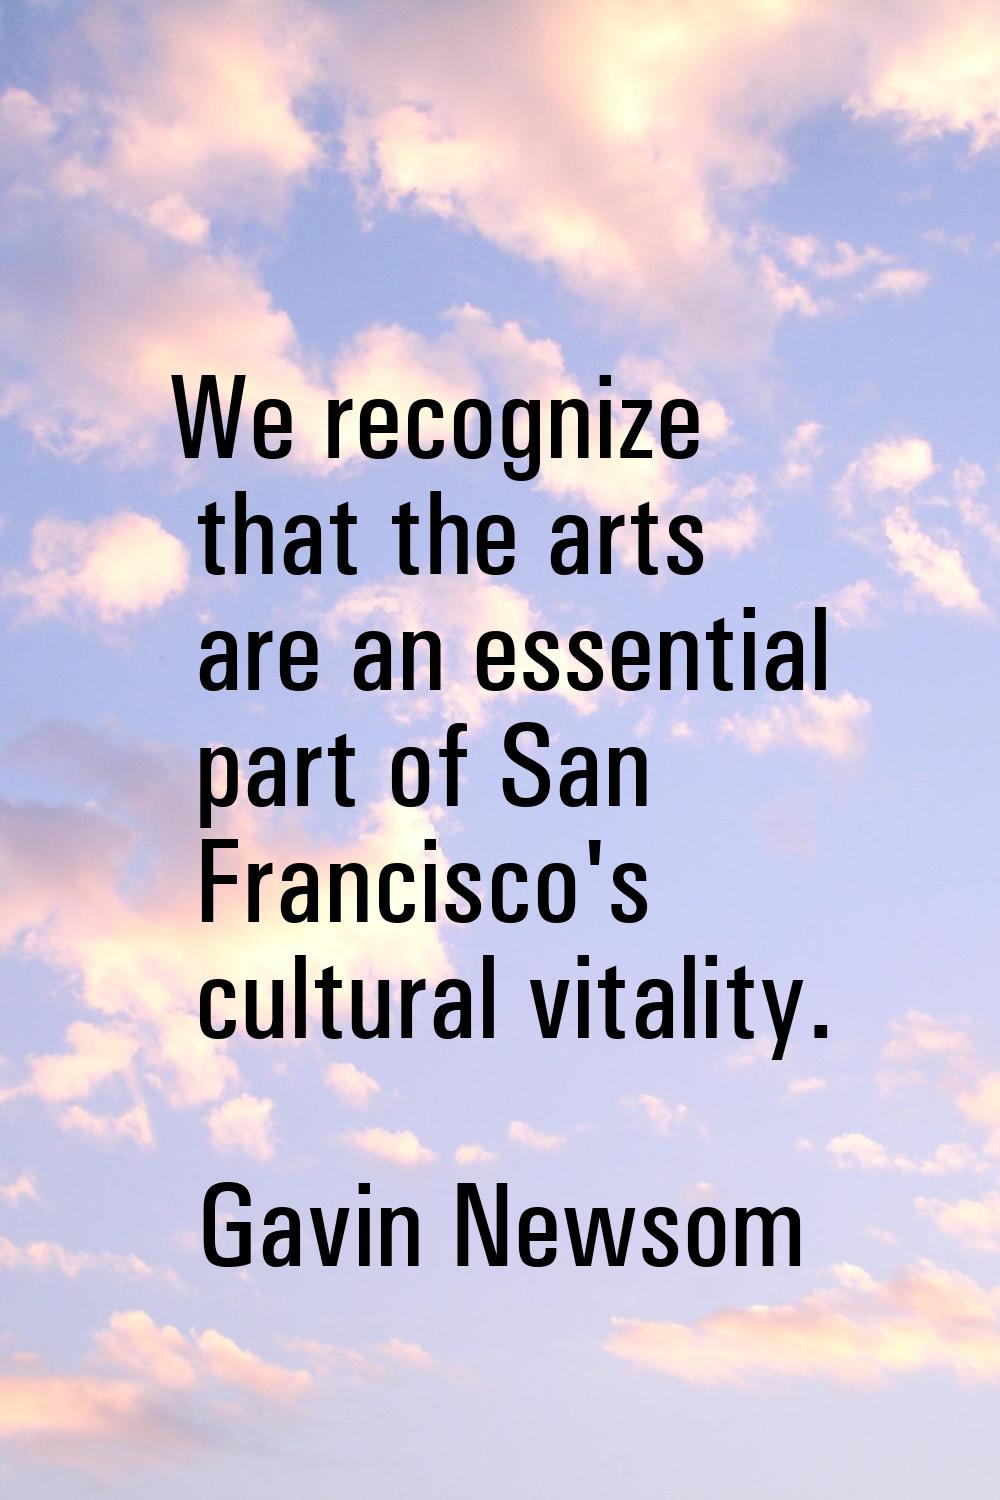 We recognize that the arts are an essential part of San Francisco's cultural vitality.